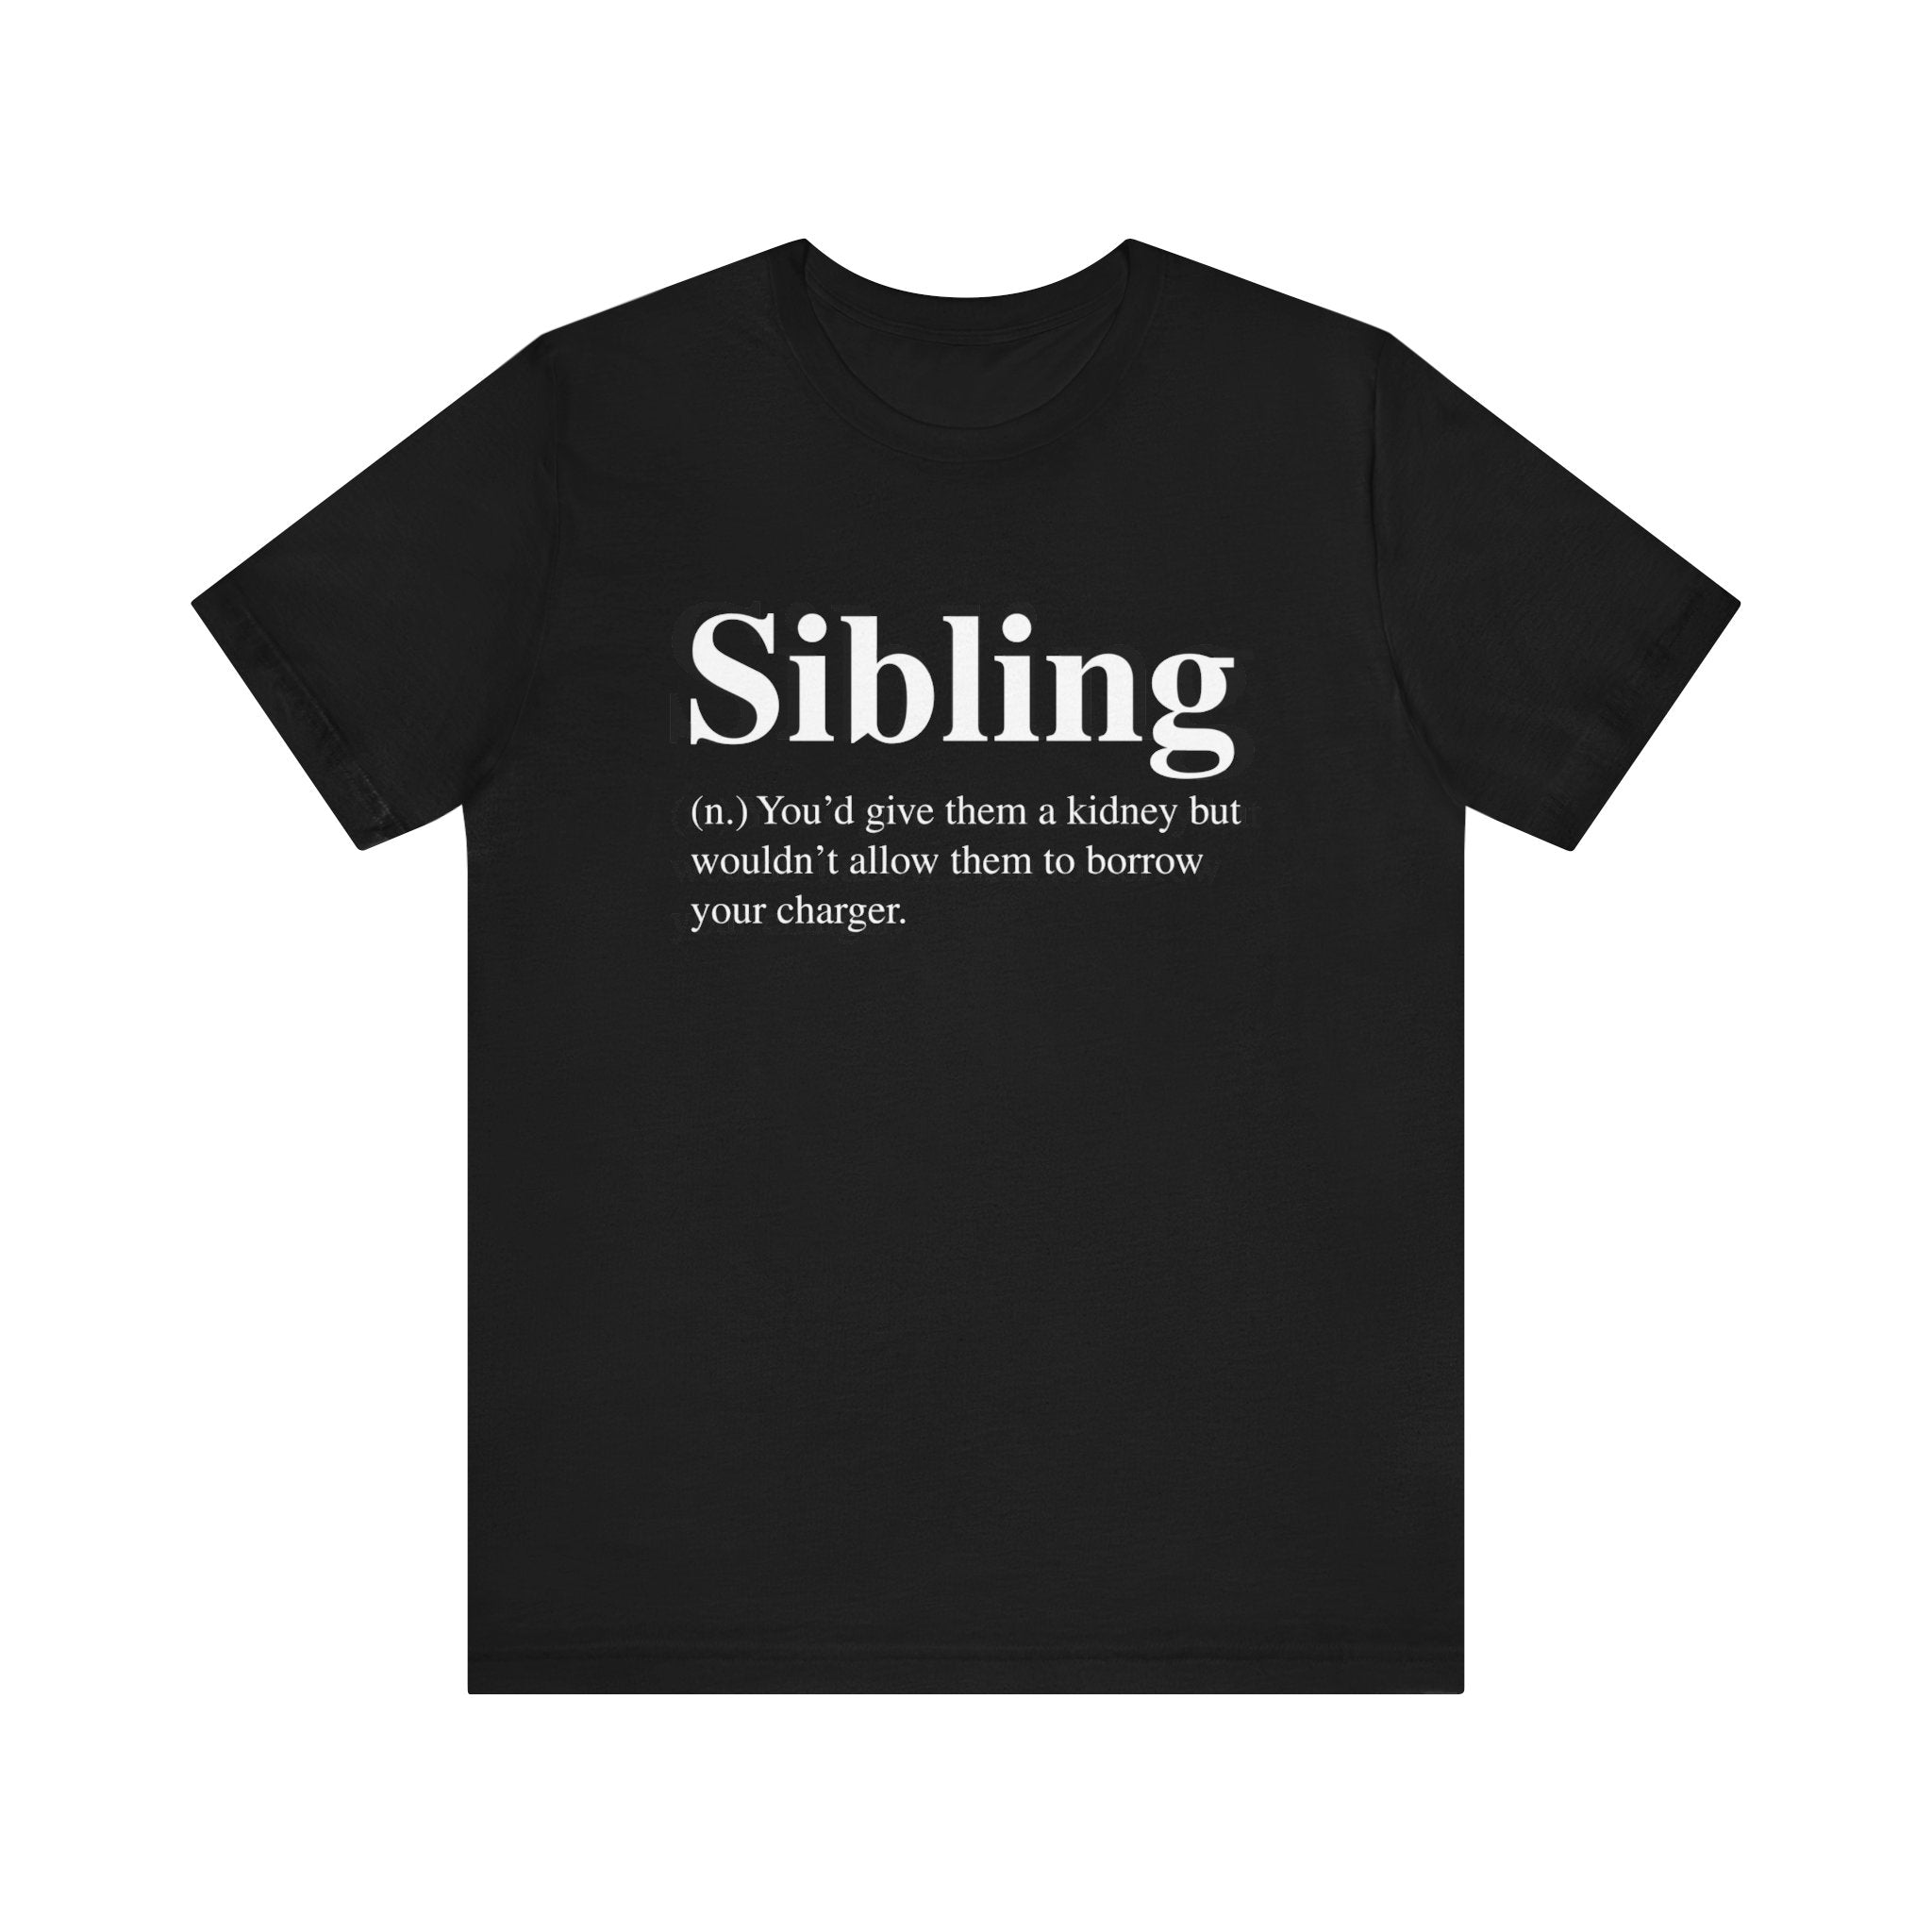 Unisex jersey tee with the word "siblings" and a humorous definition printed in white text.
Product Name: Sibling T-Shirt